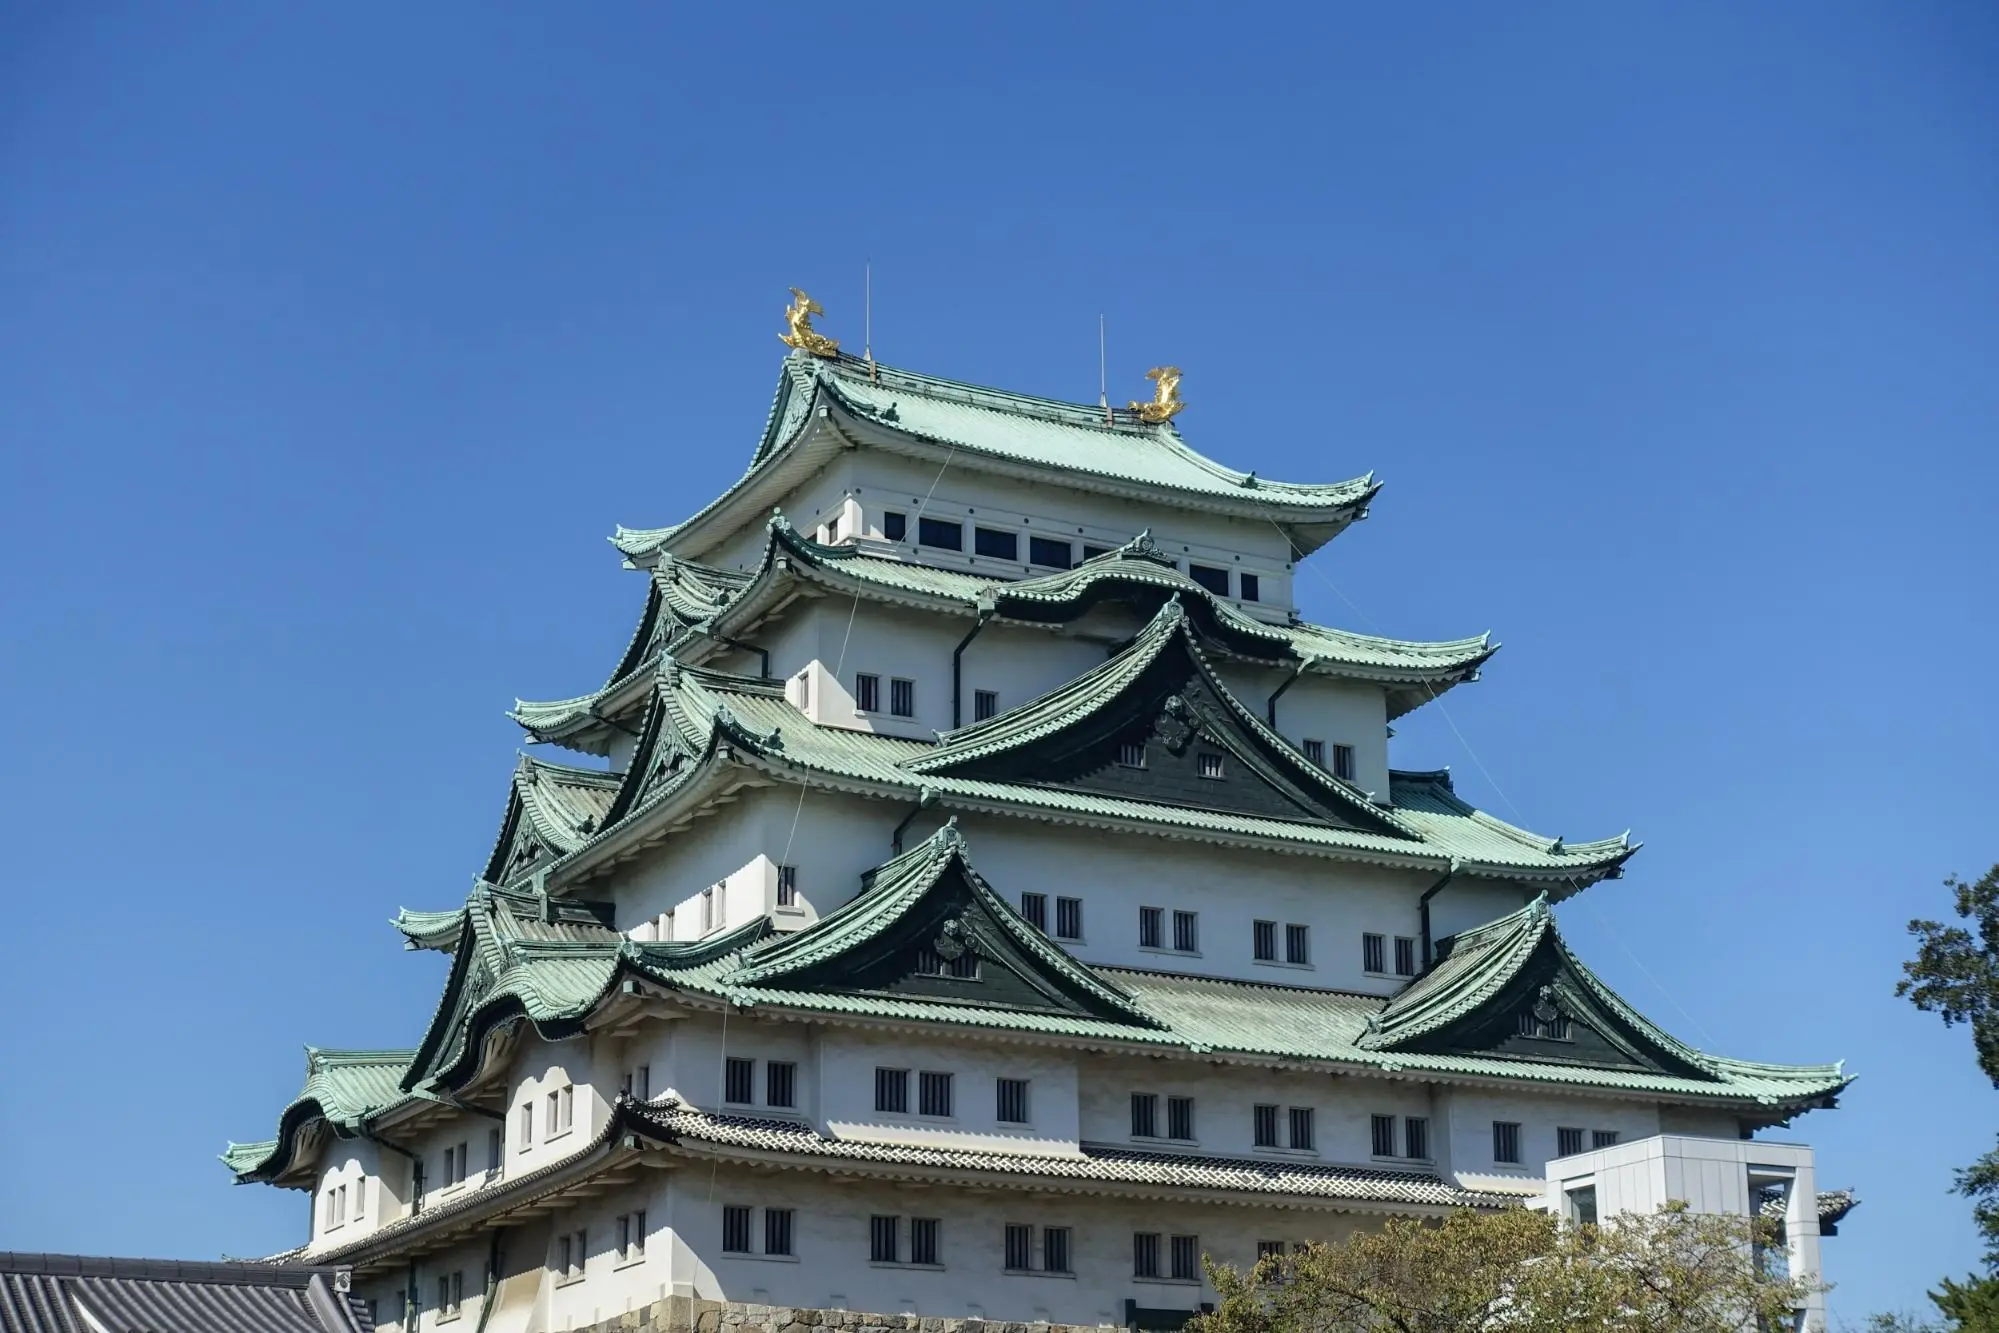 5 points to enjoy Nagoya Castle! A thorough report on the highlights from Hommaru Palace to gourmet food